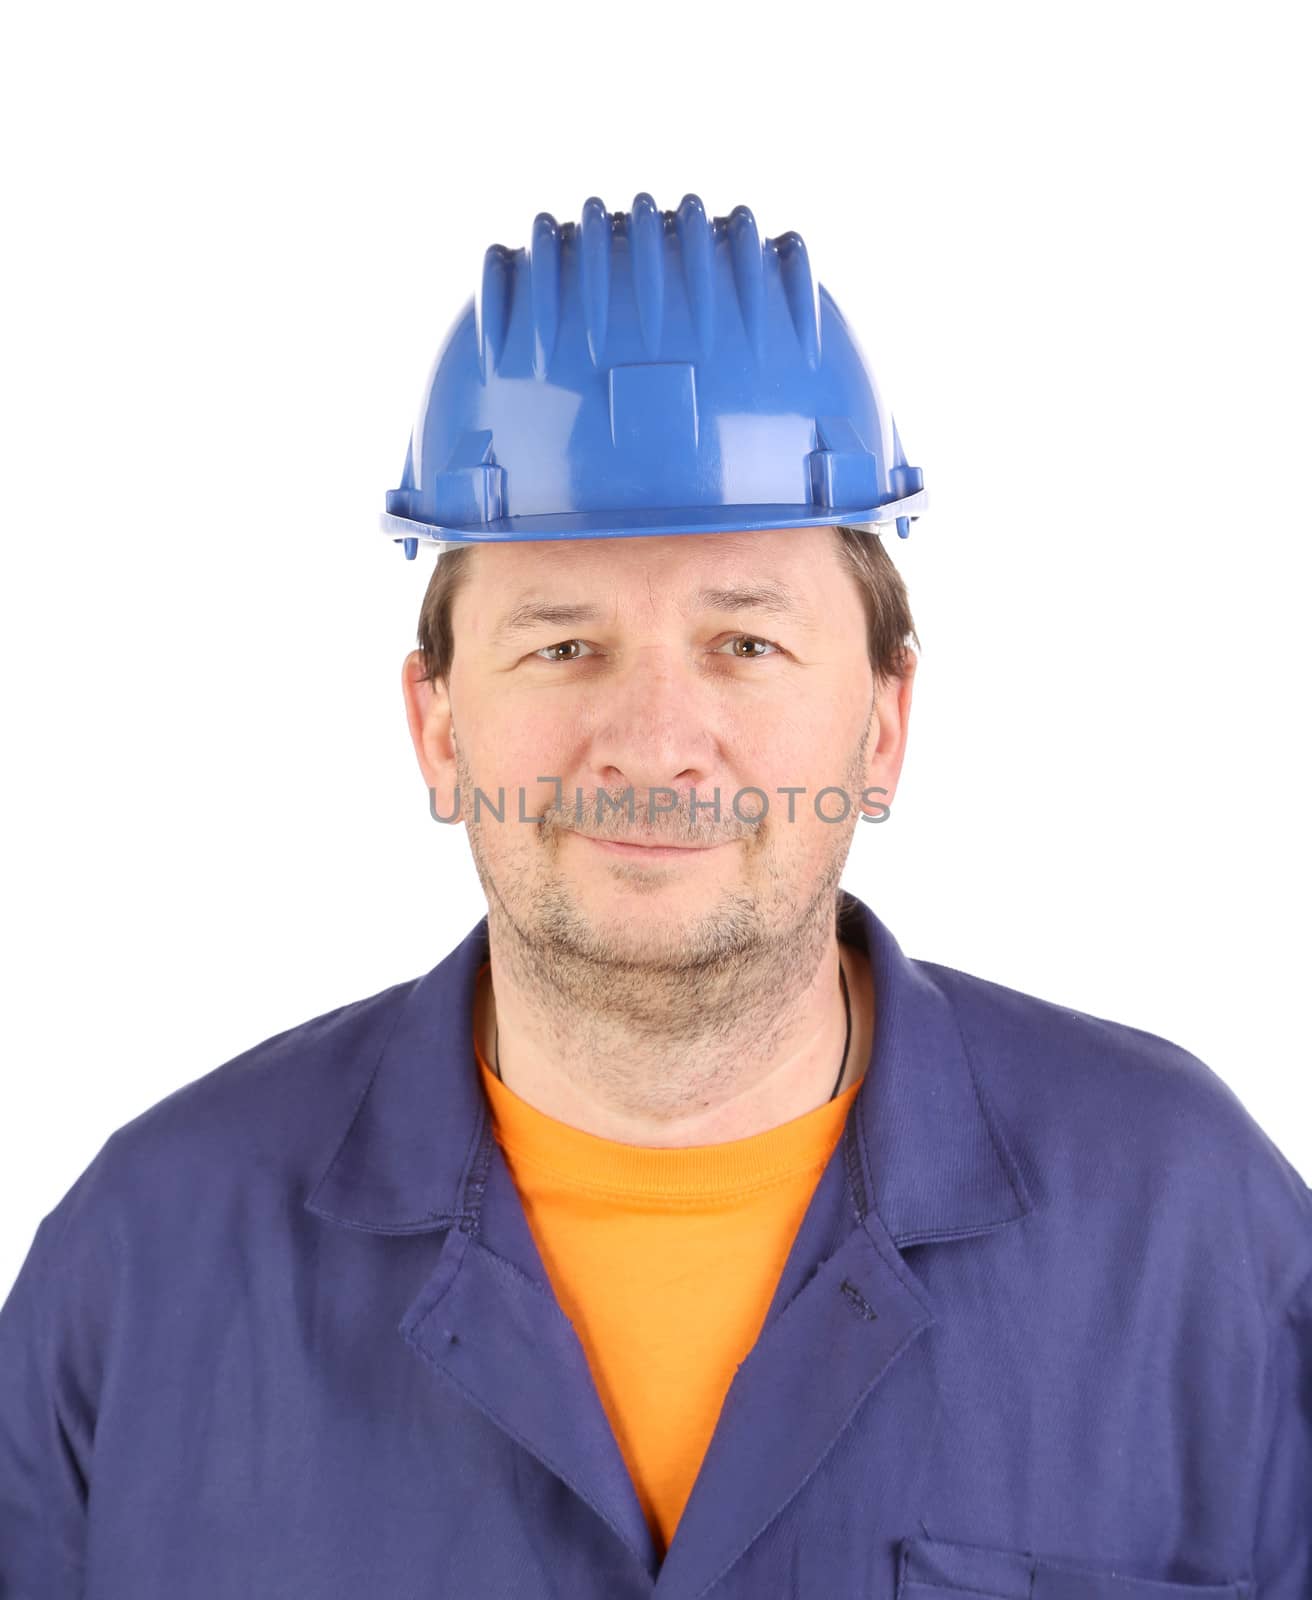 Confident worker portrait with hard hat by indigolotos